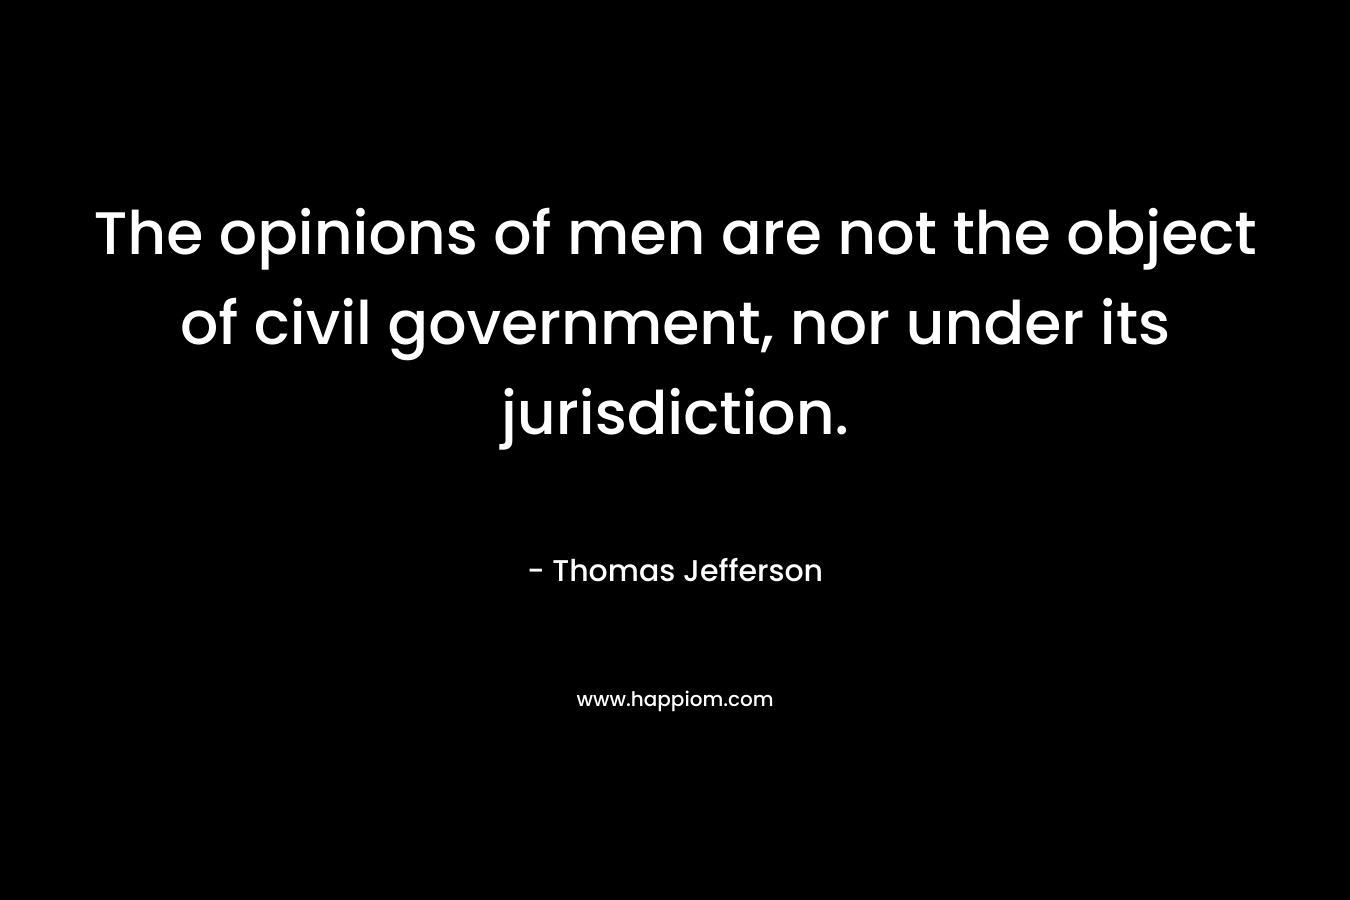 The opinions of men are not the object of civil government, nor under its jurisdiction. – Thomas Jefferson